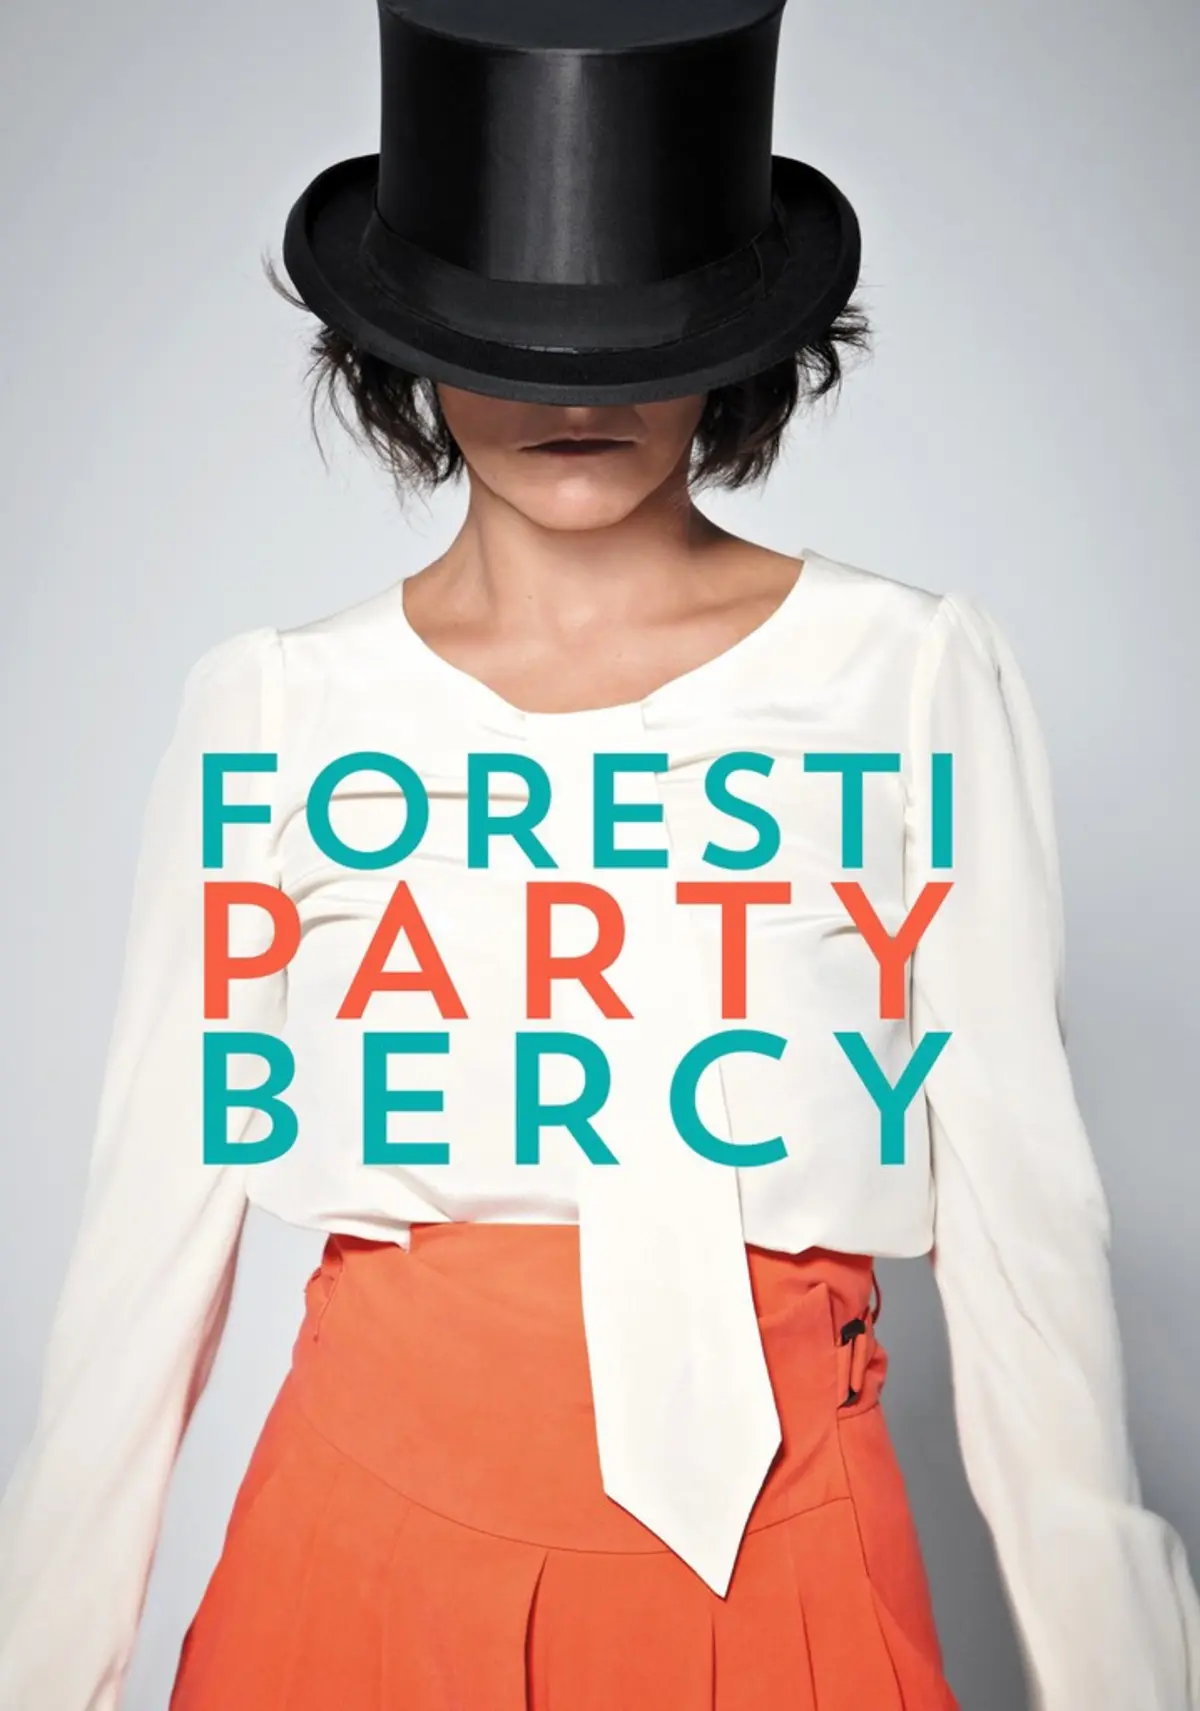 Florence Foresti - Foresti Party Bercy